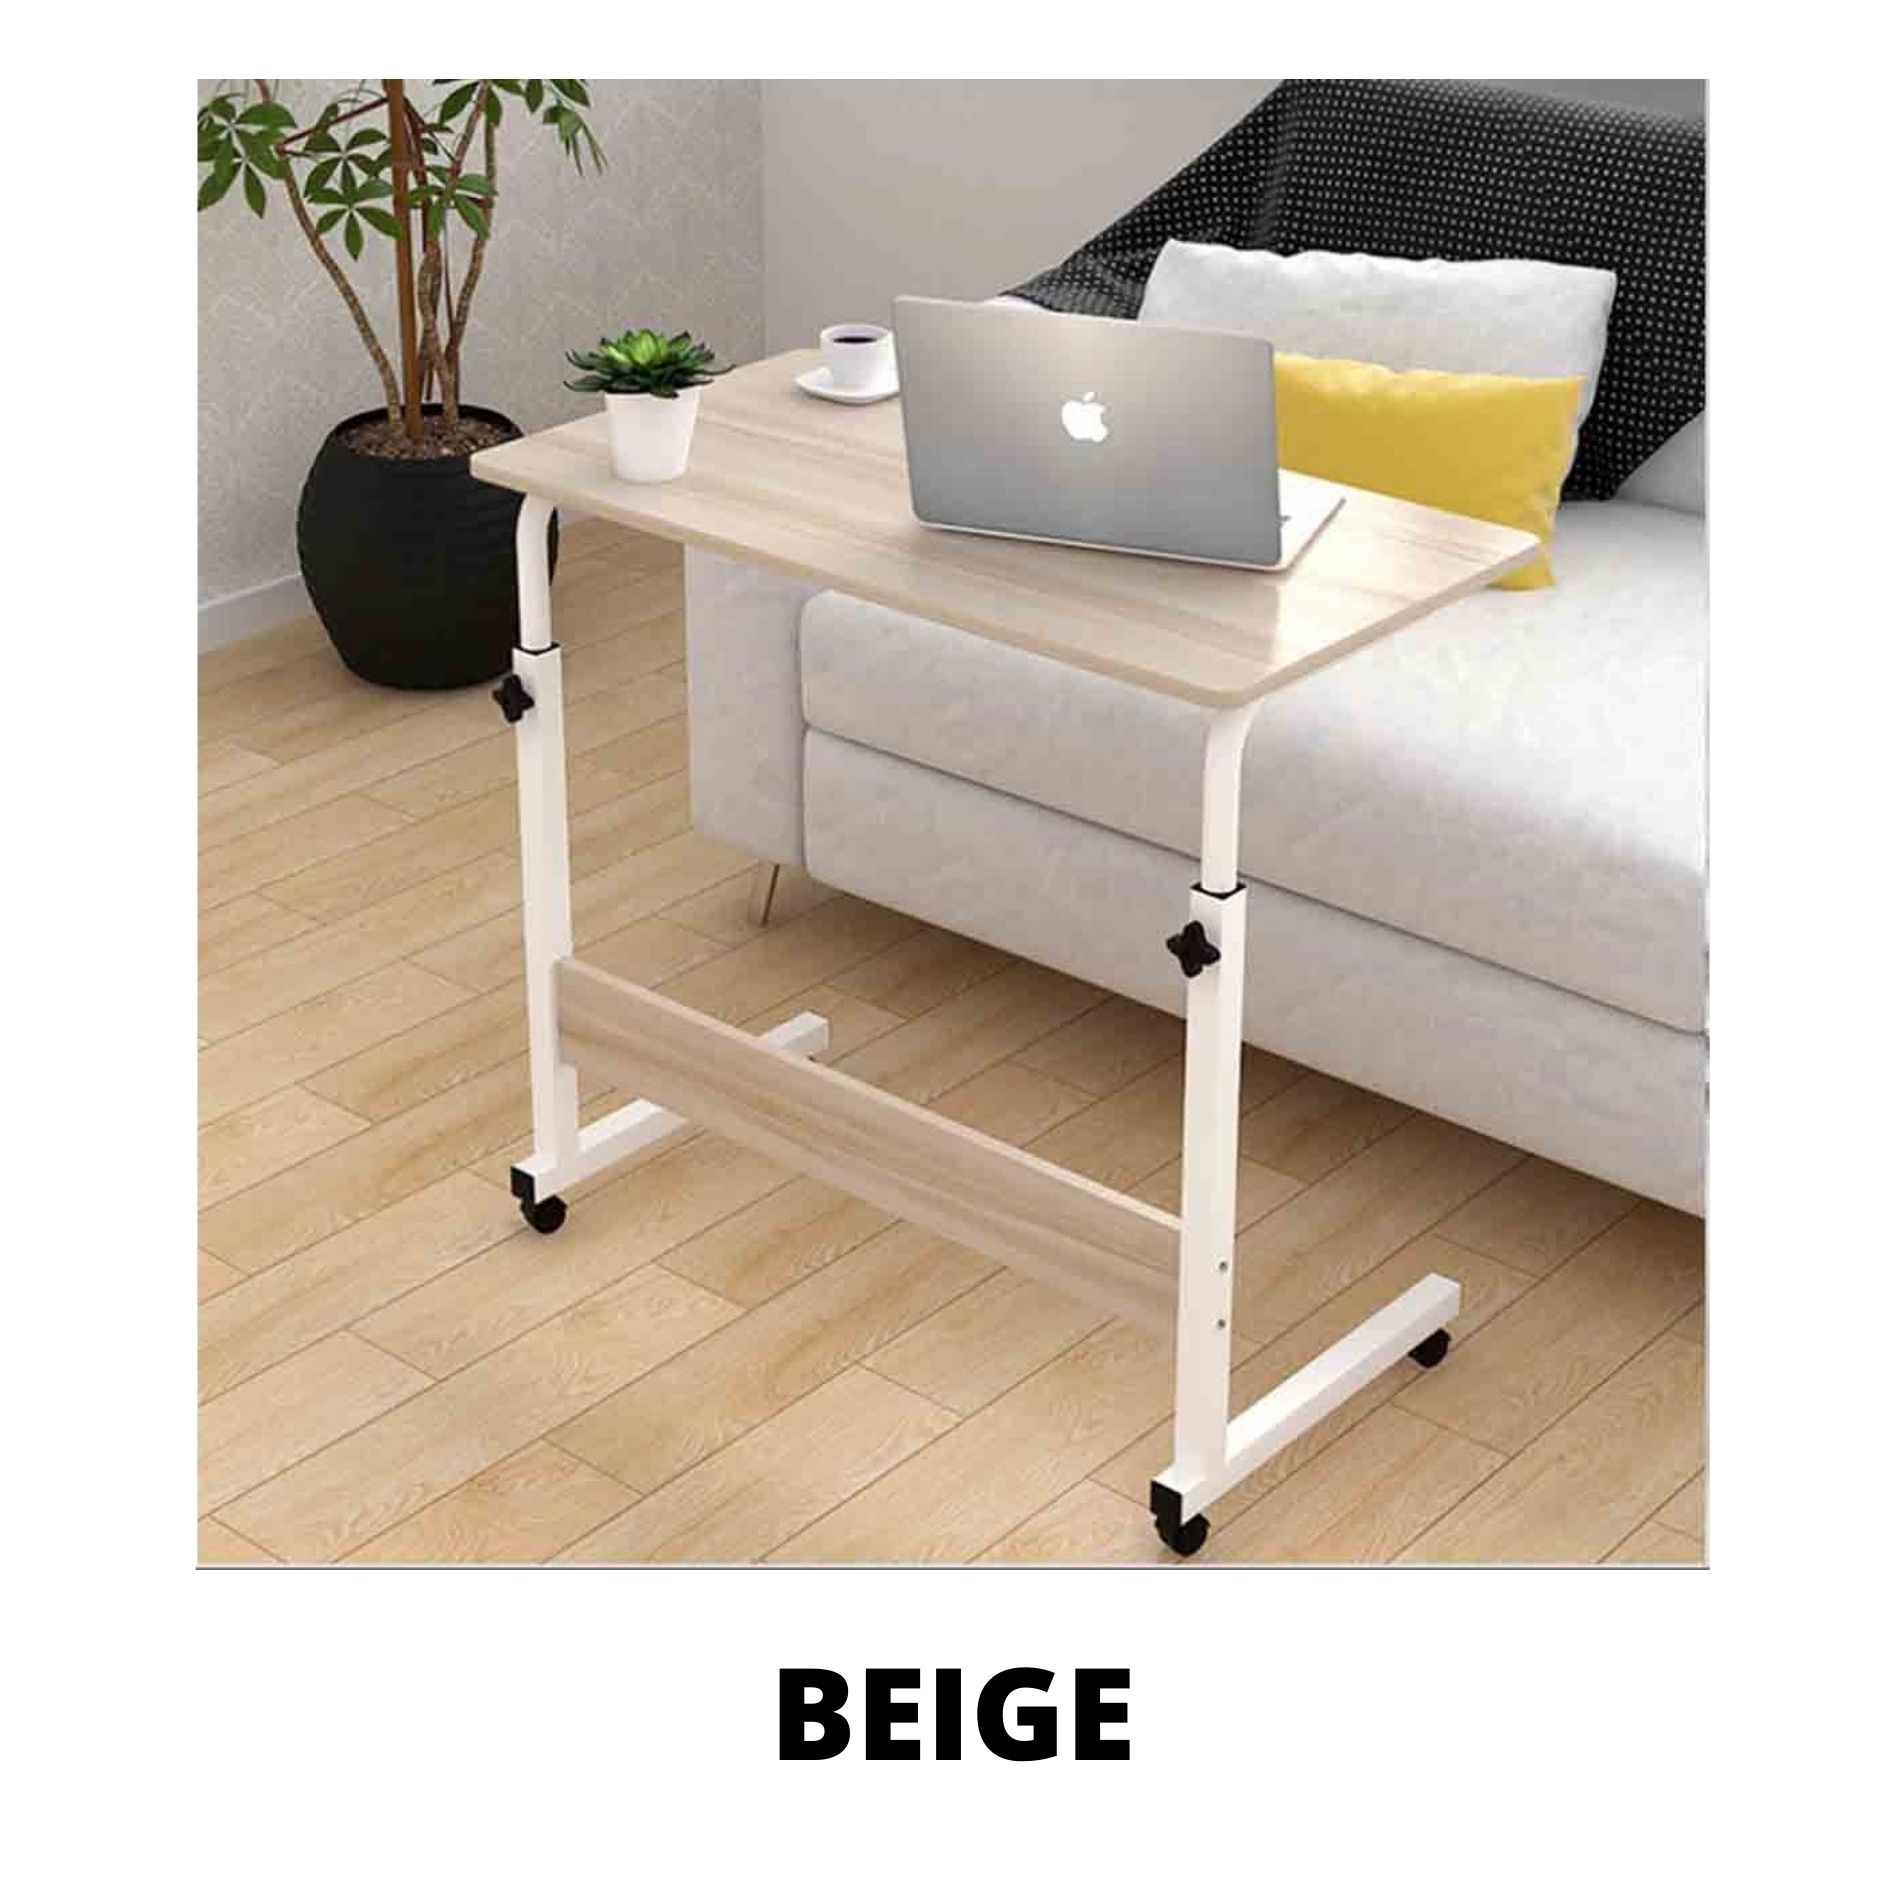 Multifunctional Portable Easy Lifting Laptop Table Computer Desk Height Adjustable with Wheels Meja Komputer 60X40cm